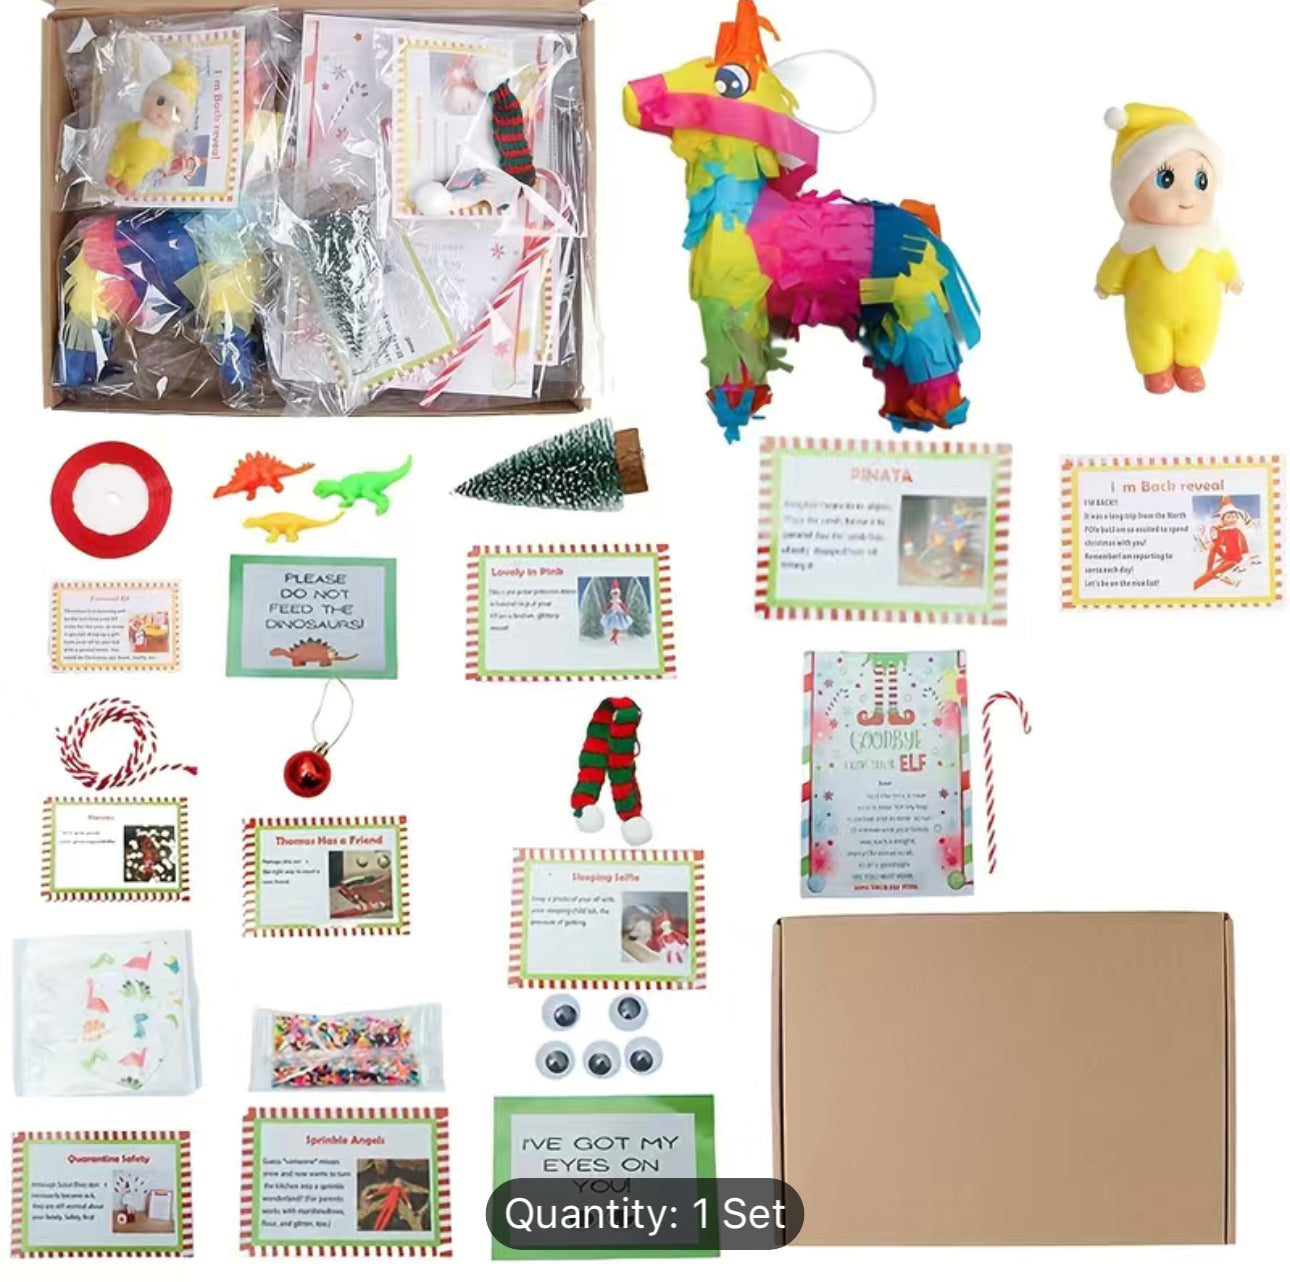 2023 Elf Kit 12 Days Of Christmas, Fun Activities Props, On Shelf Kit, Kits Best Christmas Countdown Gift For The Children'S Or Friends And Family (12Days)